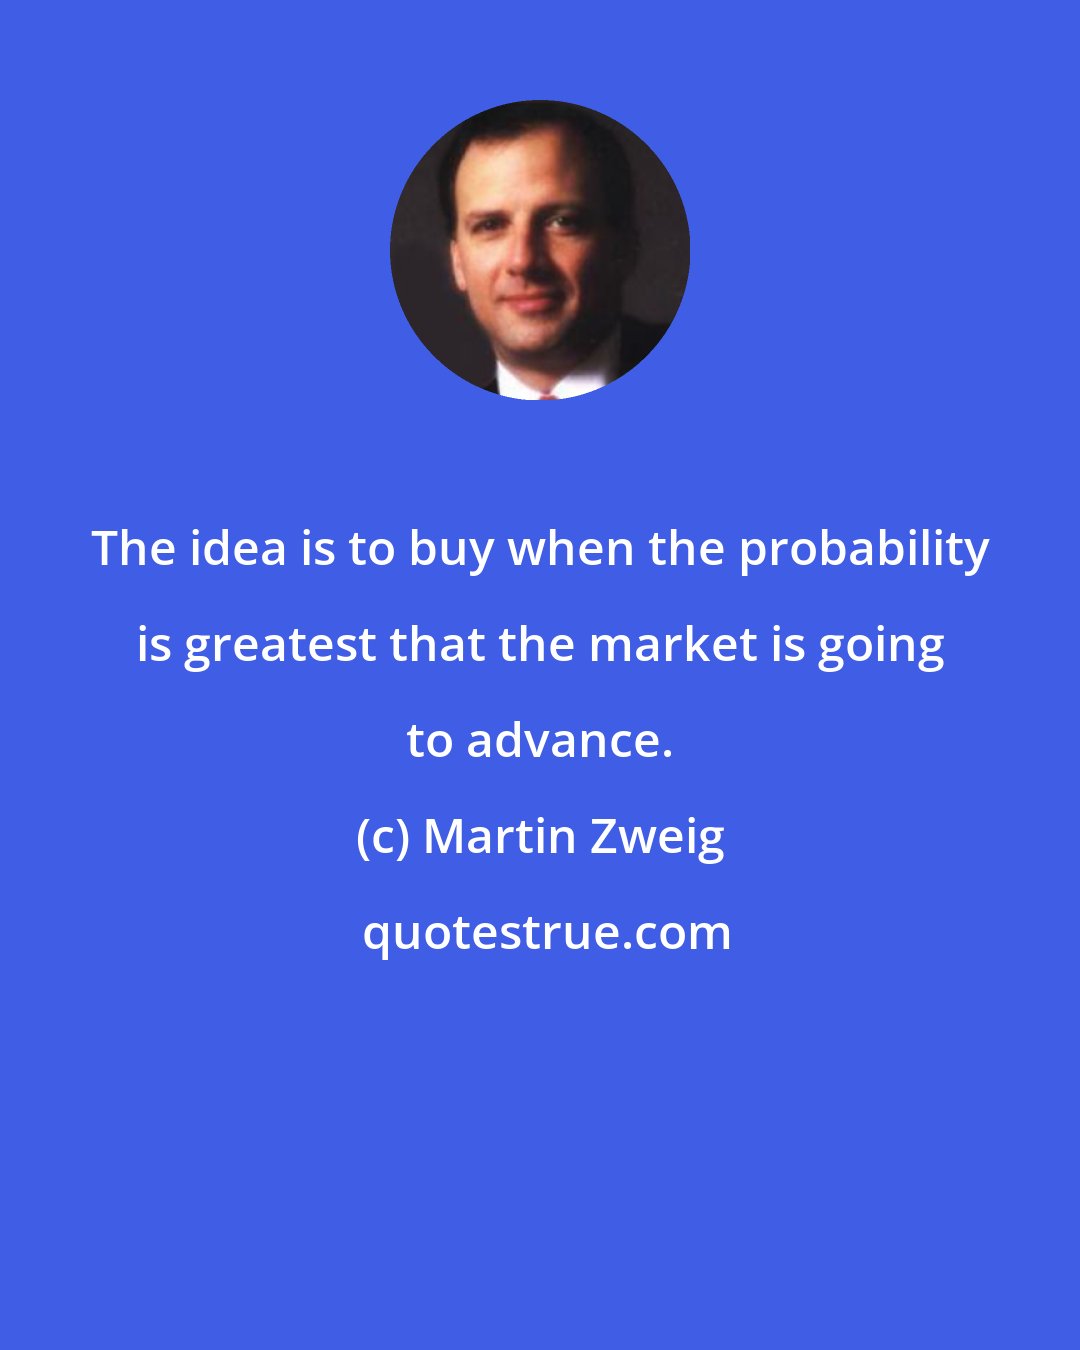 Martin Zweig: The idea is to buy when the probability is greatest that the market is going to advance.